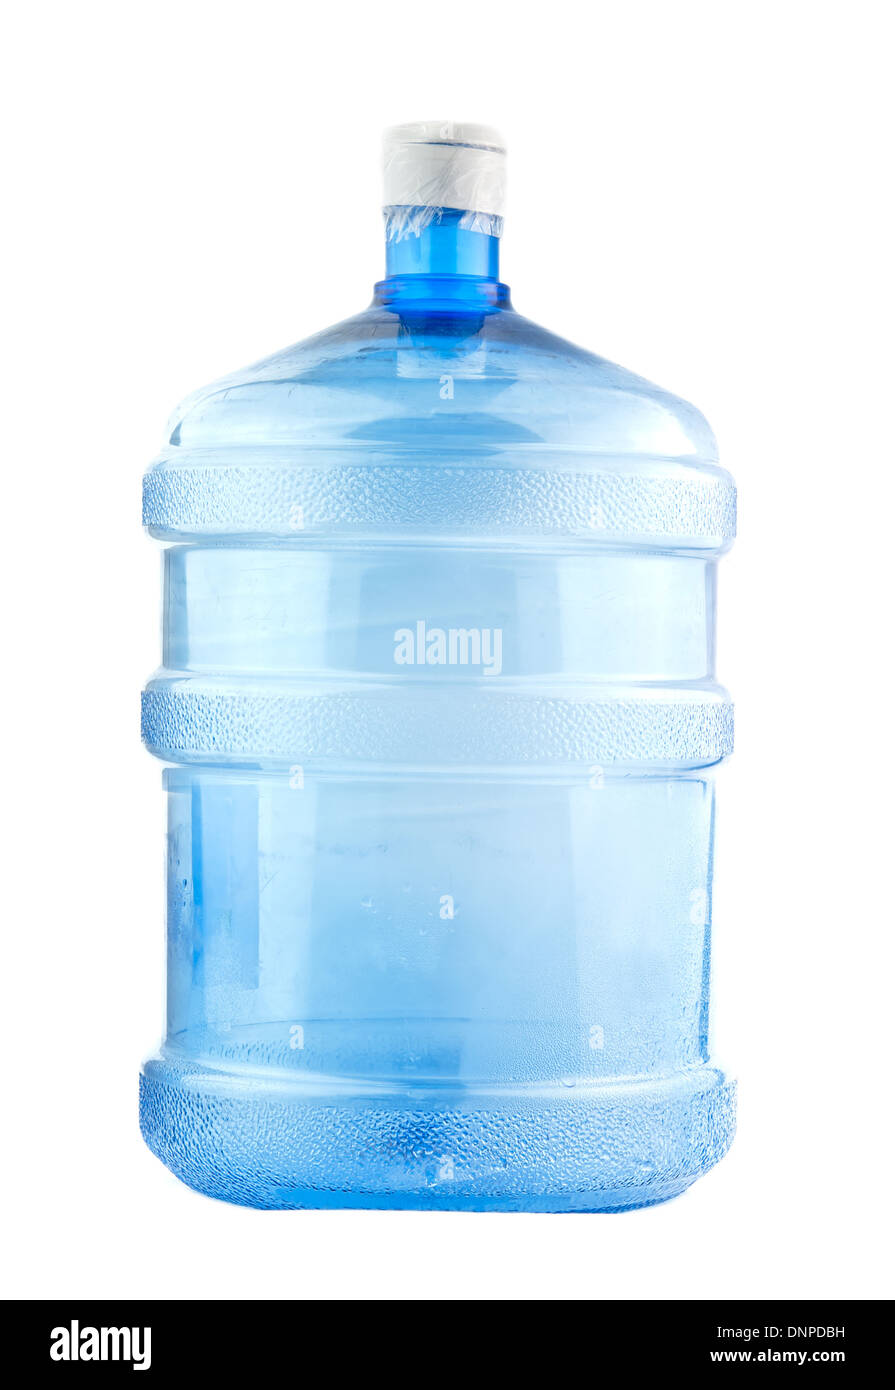 https://c8.alamy.com/comp/DNPDBH/big-bottle-of-water-isolated-on-a-white-background-DNPDBH.jpg